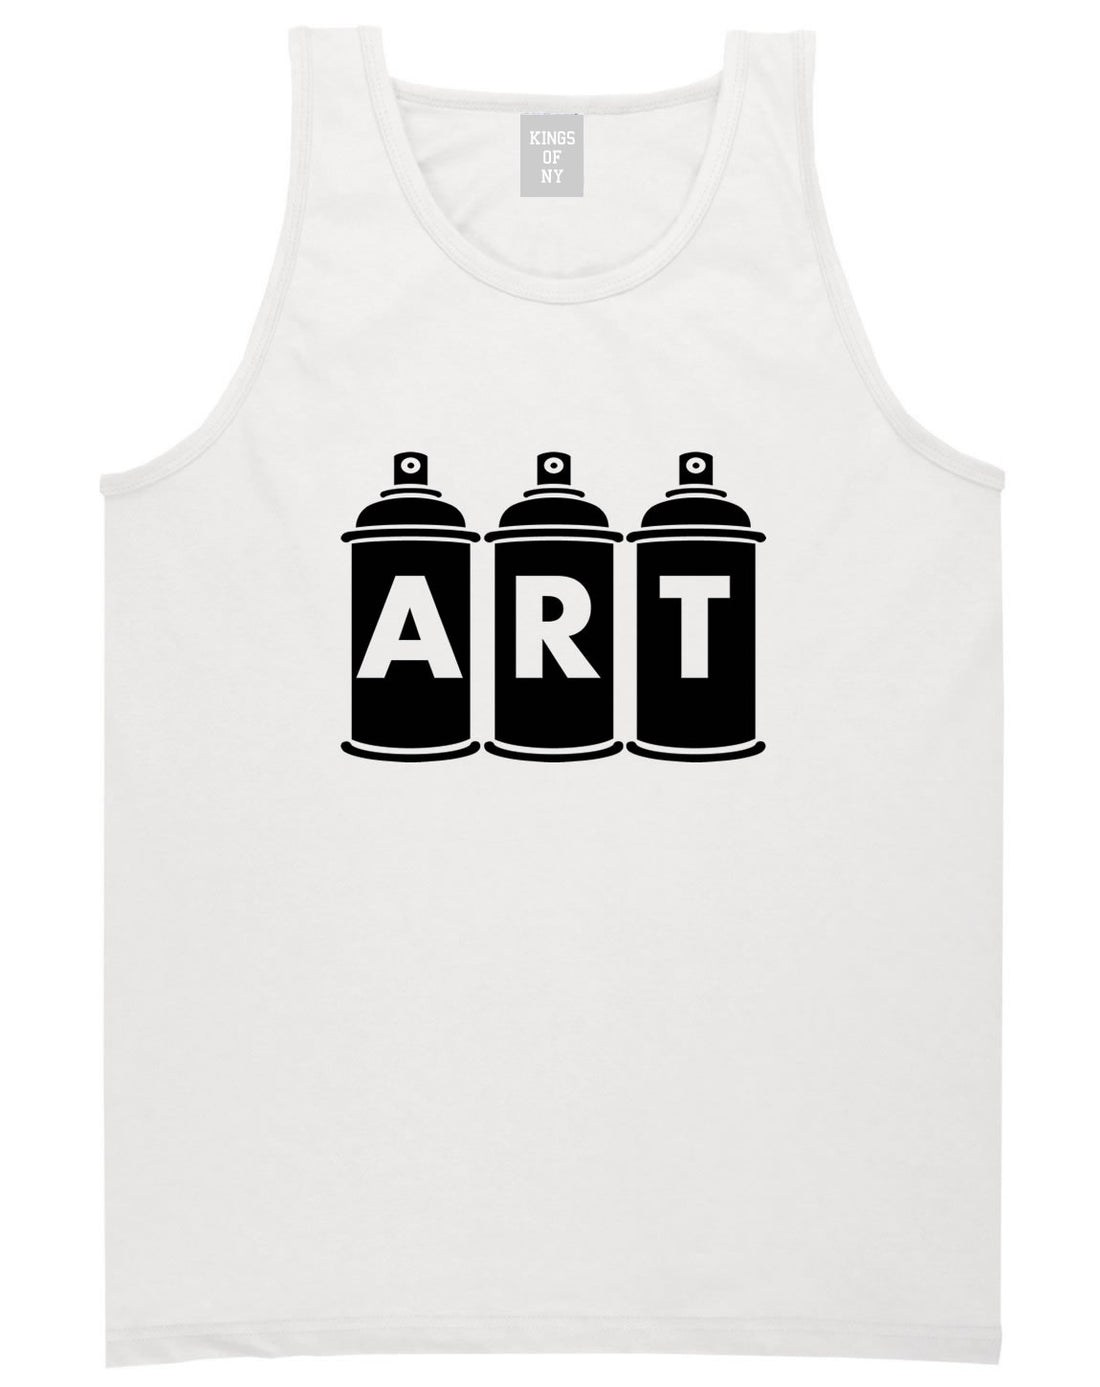 Art graf graffiti spray can paint artist Tank Top in White By Kings Of NY